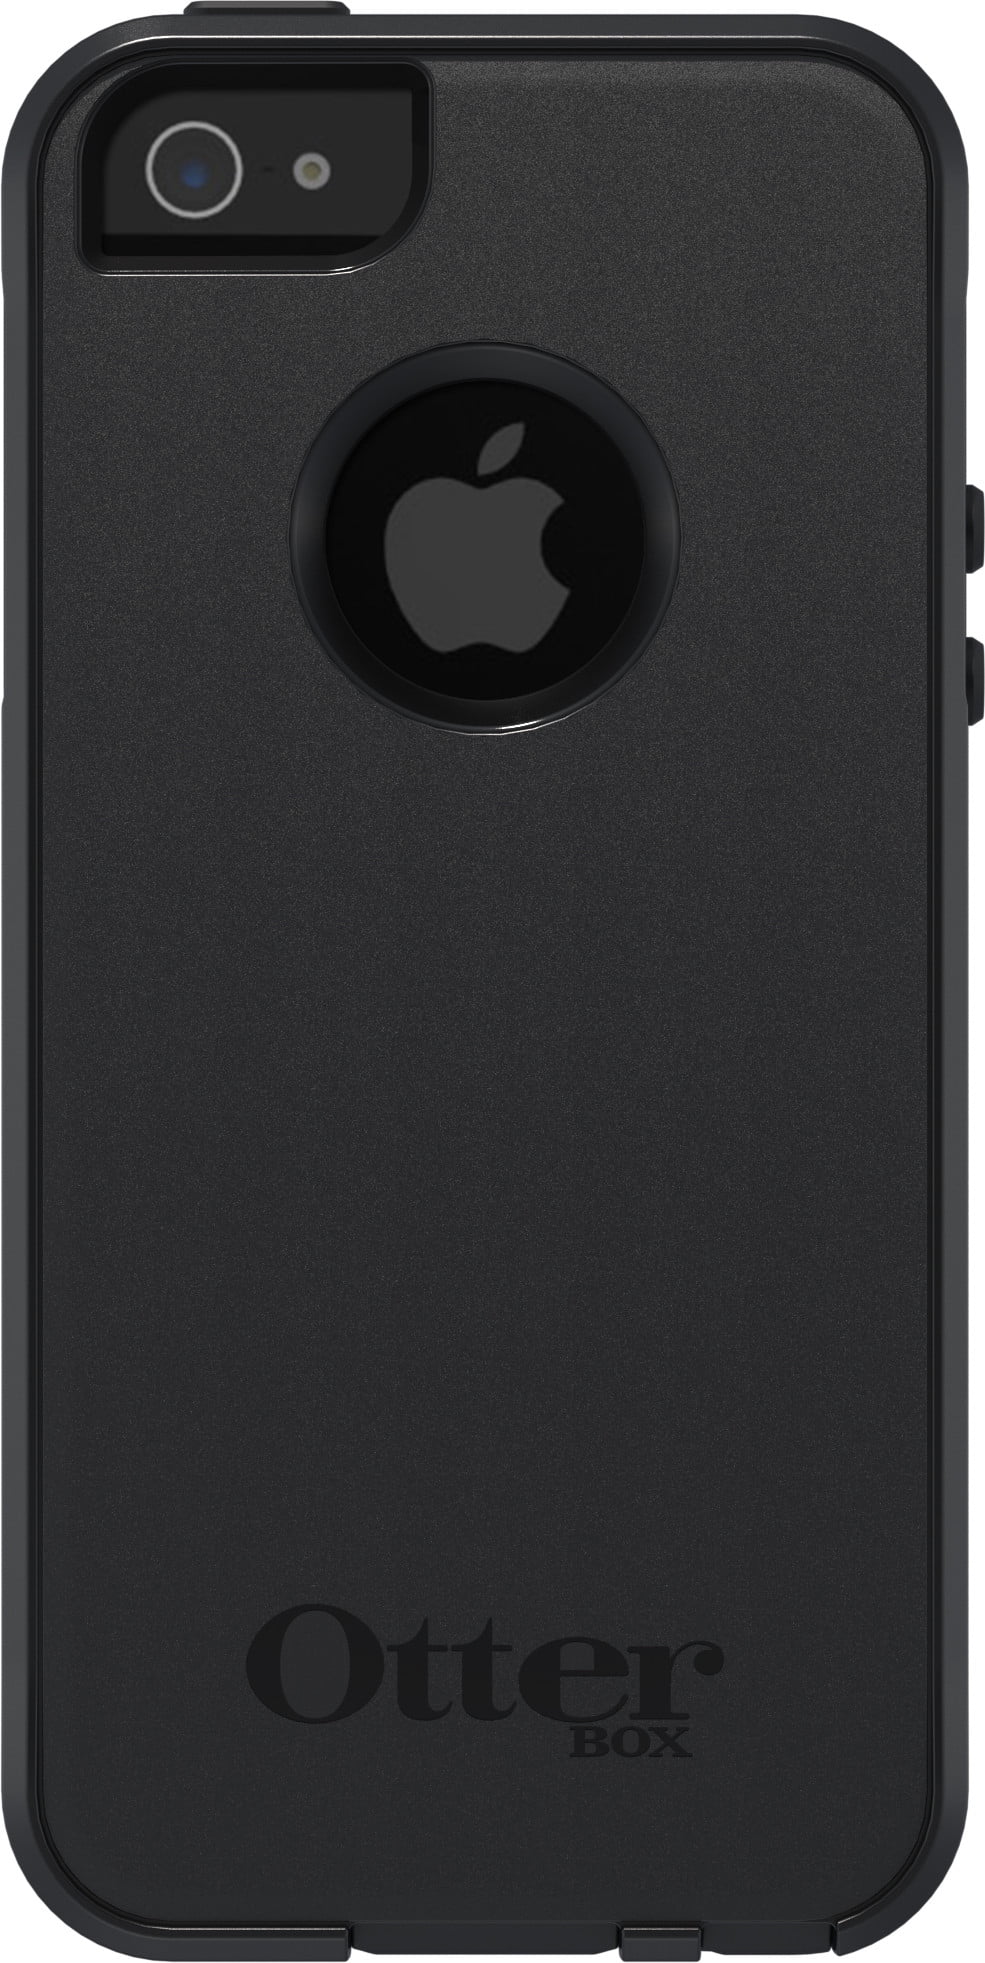 Genuine OtterBox Symmetry Series Rugged Snap On Case Cover For iPhone 5/5S/SE 